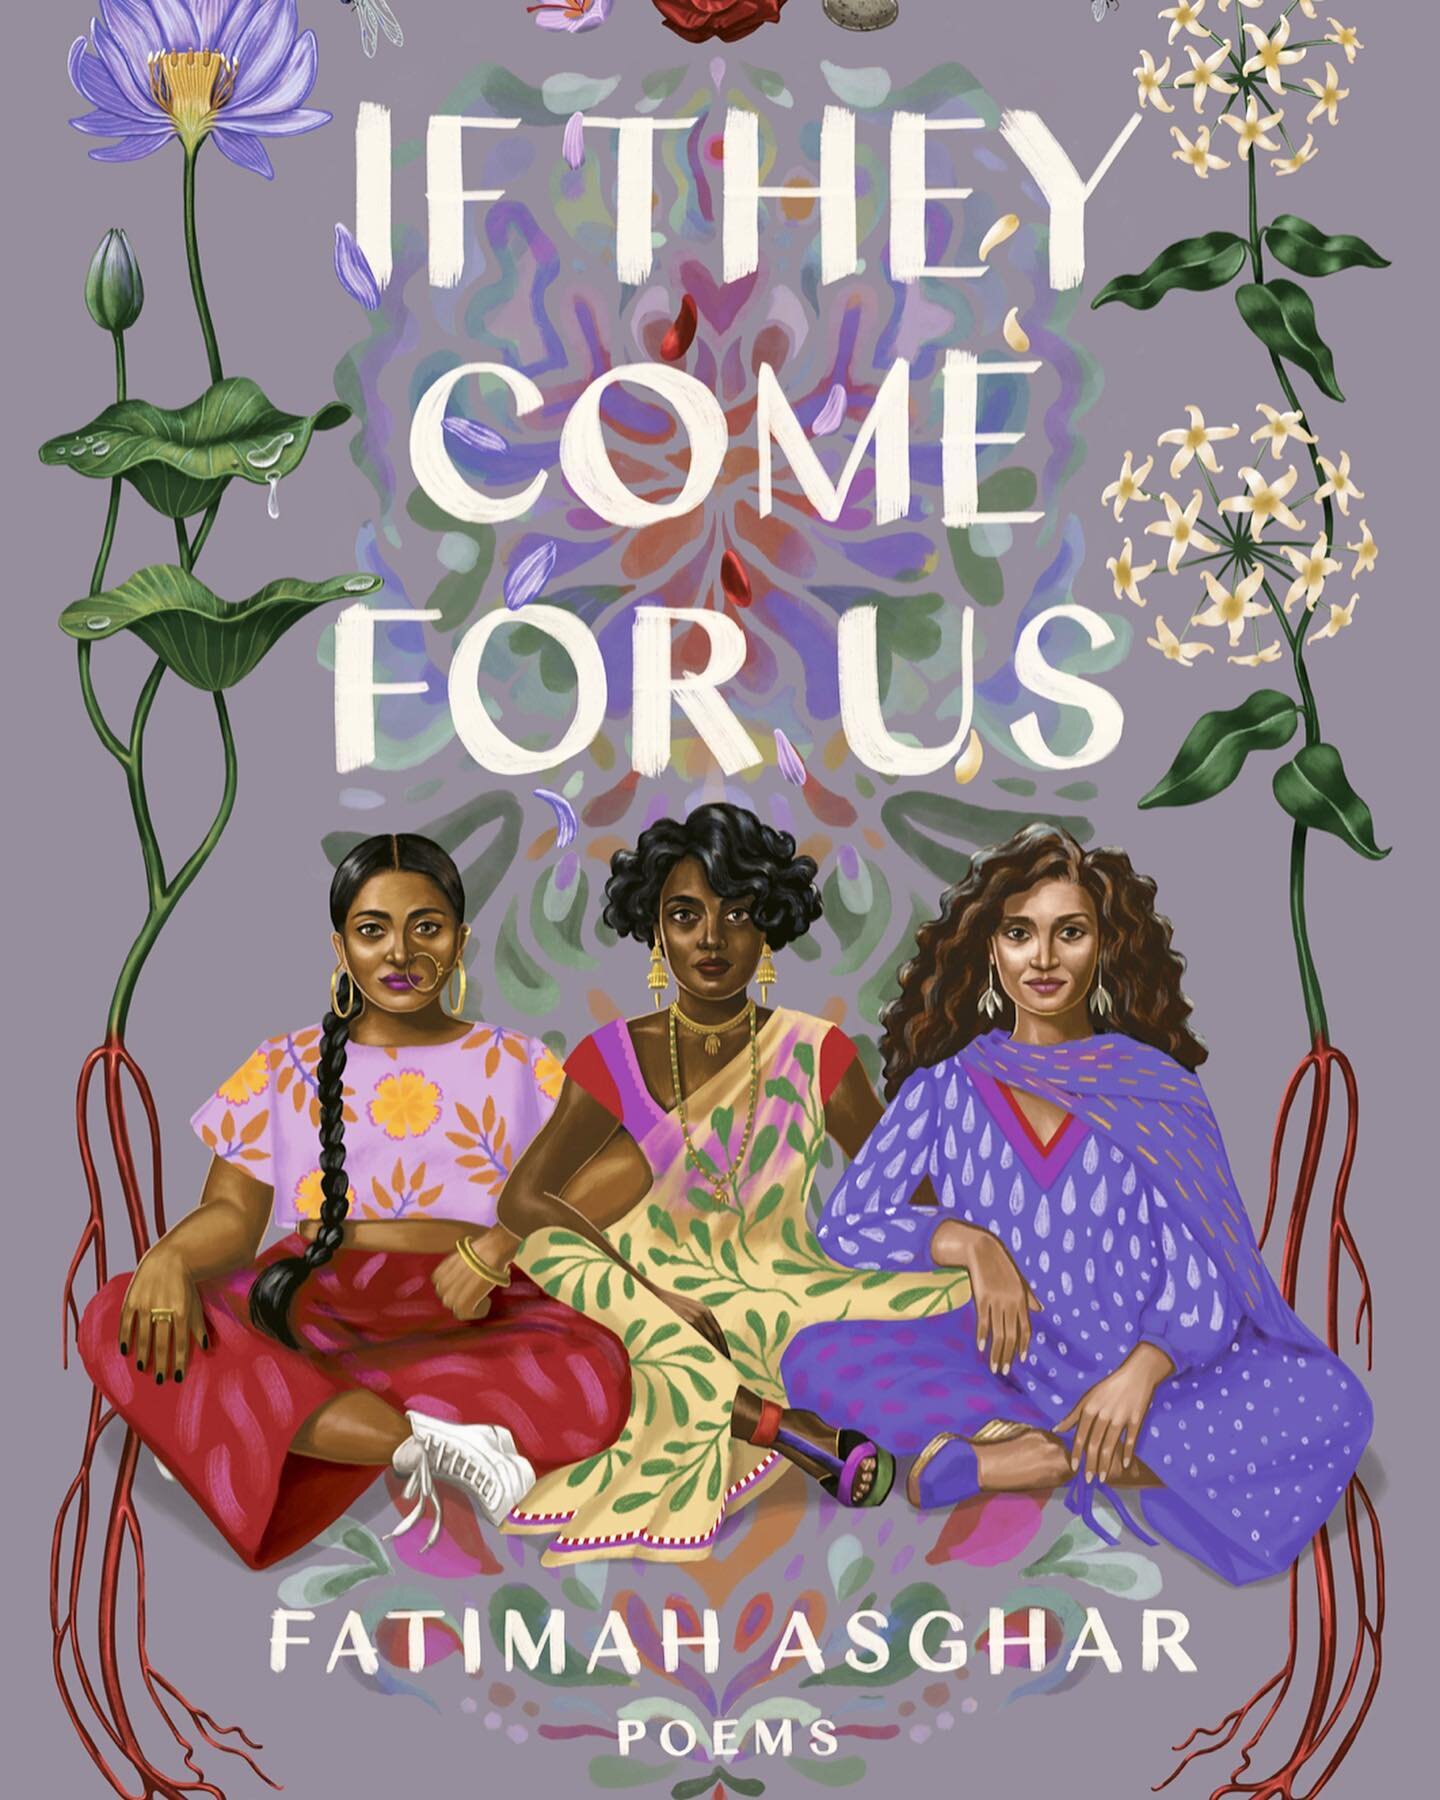 We are delighted in awaiting @asgharthegrouch &lsquo;s new work of fiction When We Were Sisters. 
&hearts;️
In anticipation, we wanted to share a poem from her debut collection of poetry If They Come For Us. We just love this book captures the experi